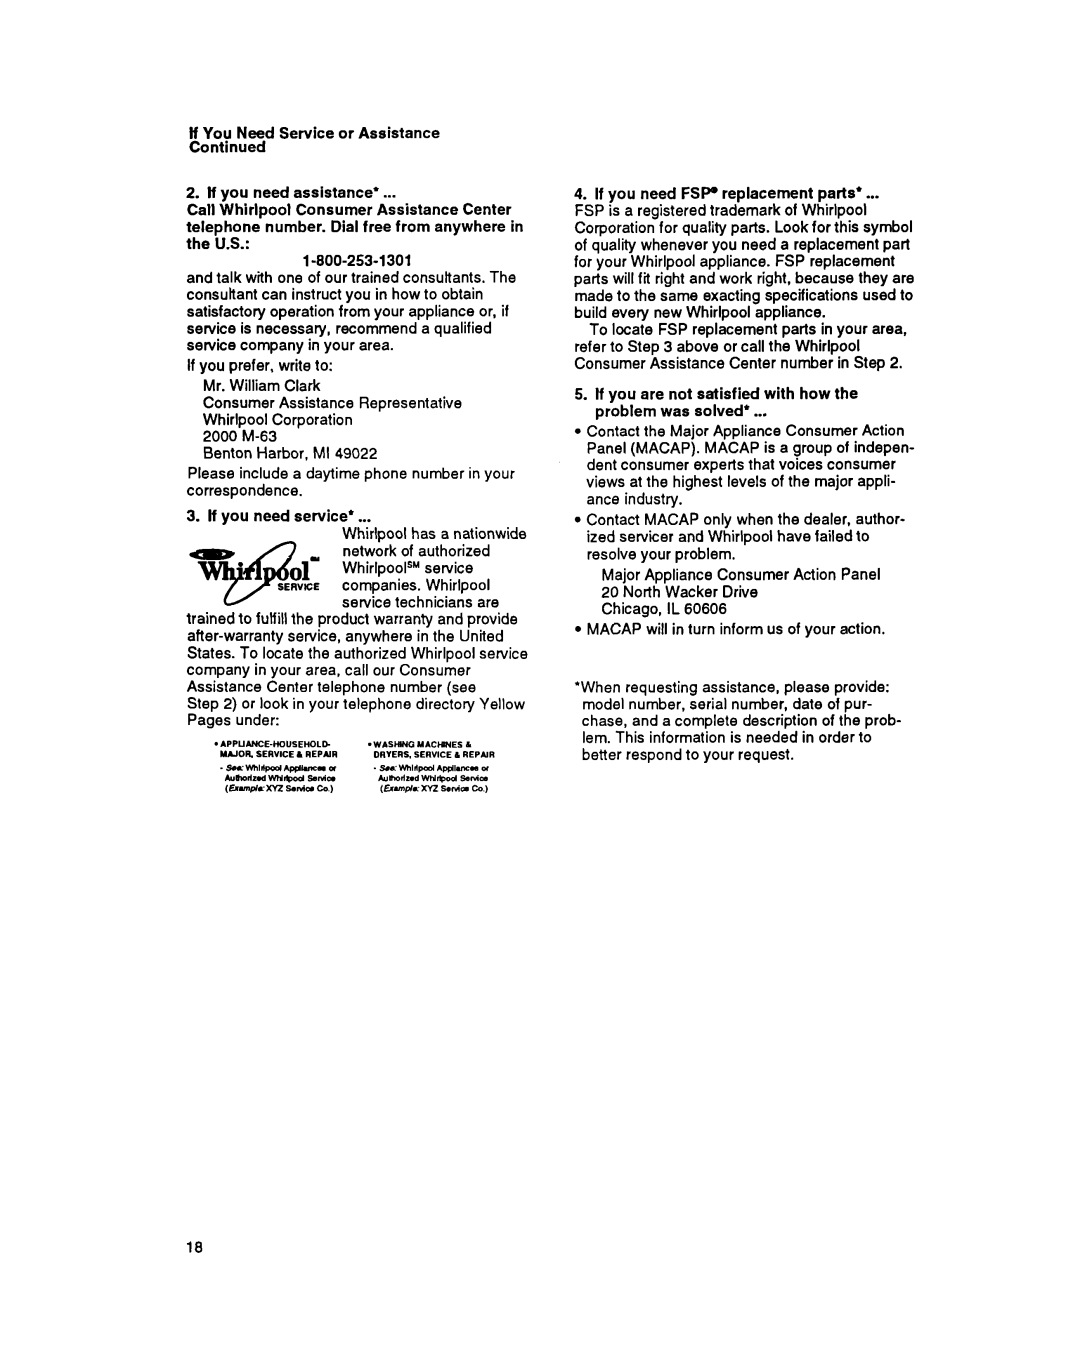 Whirlpool SBl3OPER manual If You Need Service or Assistance Continued 